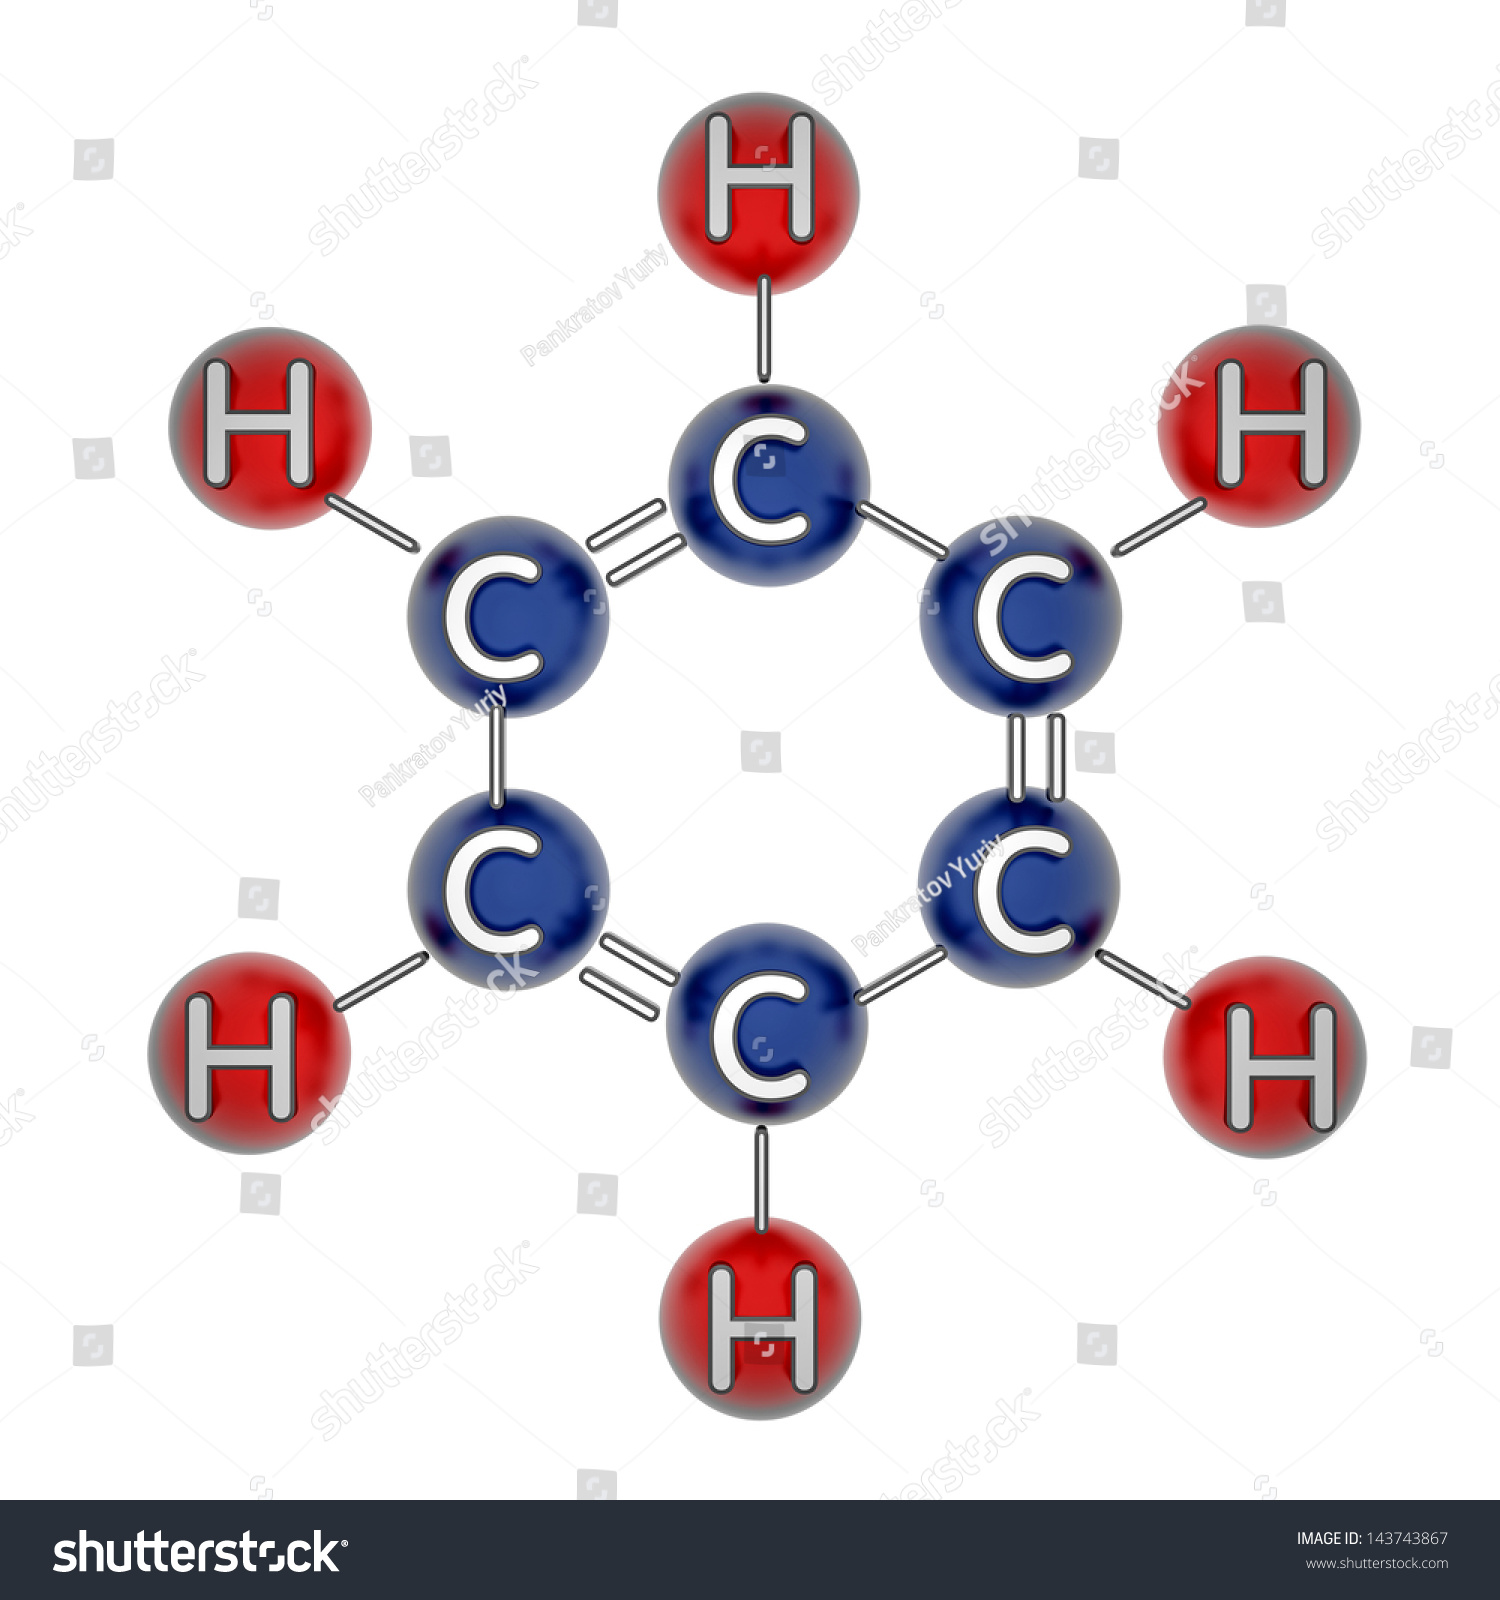 C6h6 Benzol 3d Model Isolated On Stock Illustration 143743867 ...